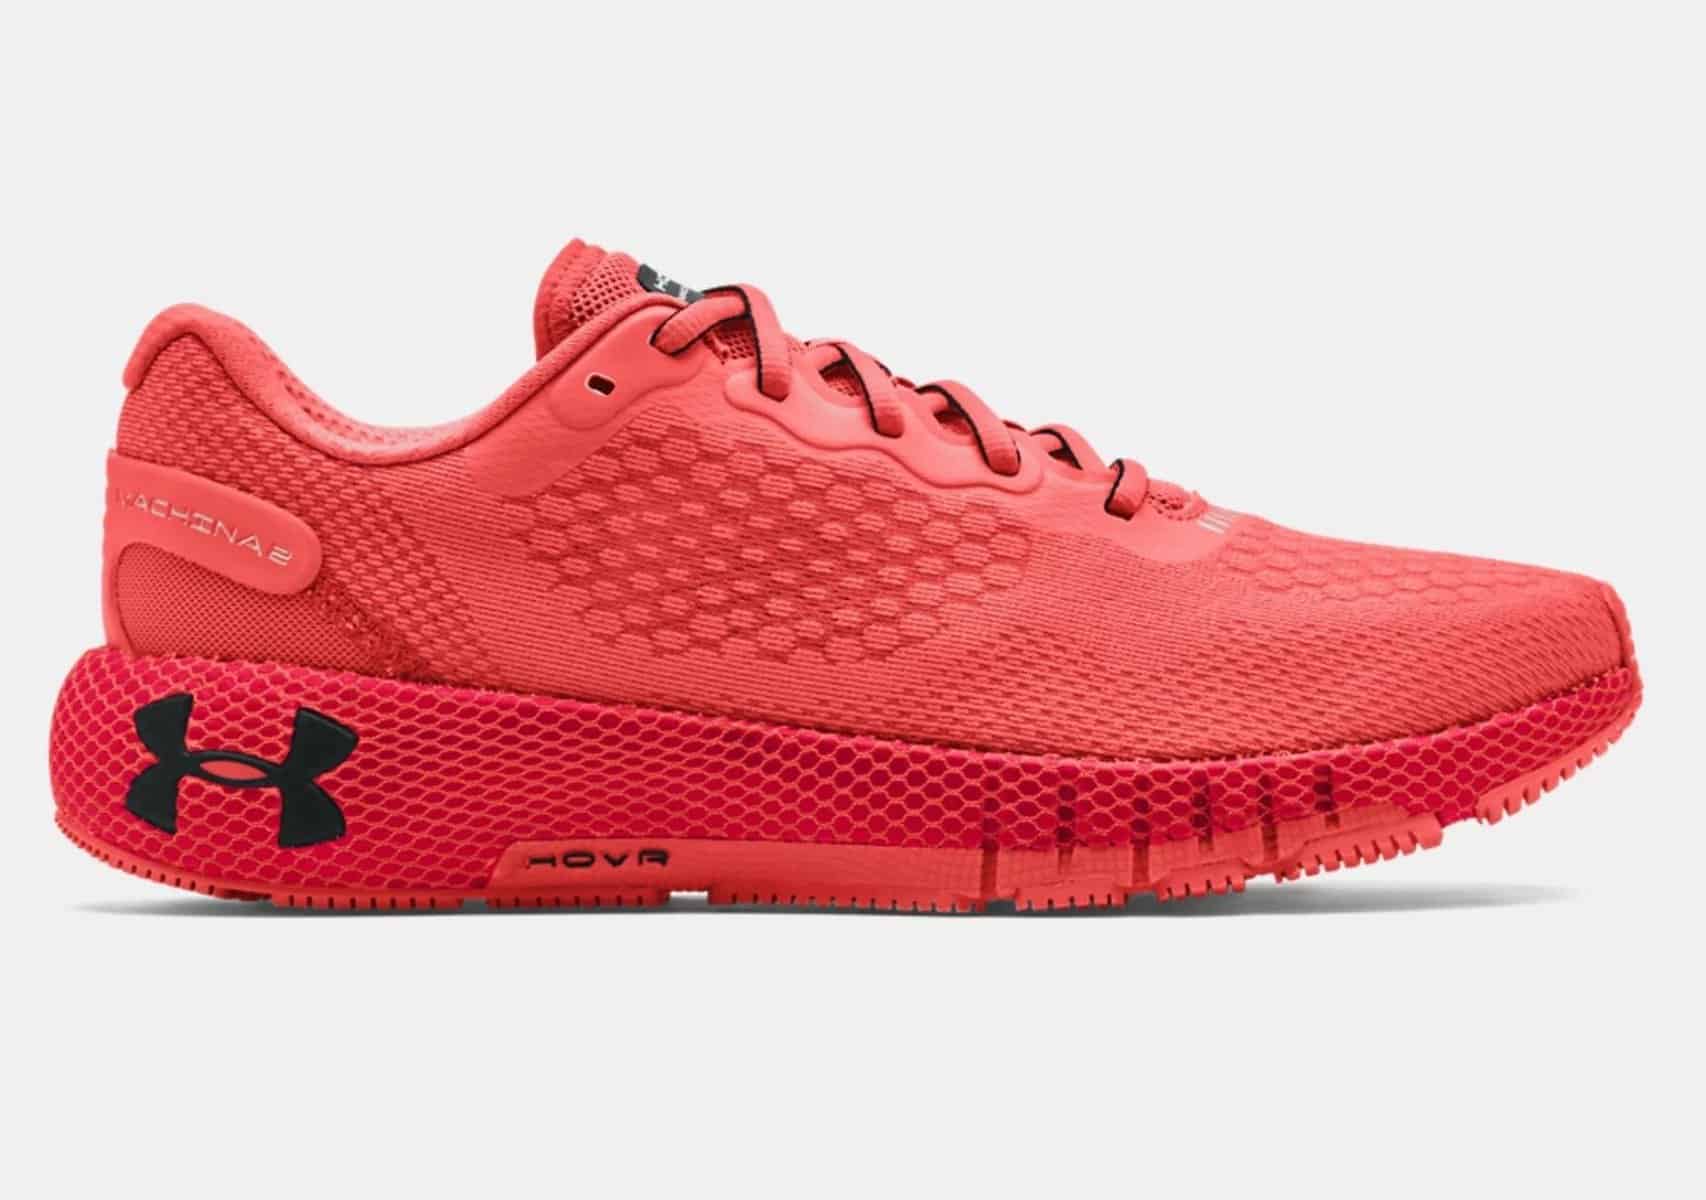 Under Armour HOVR Machina Running Shoes